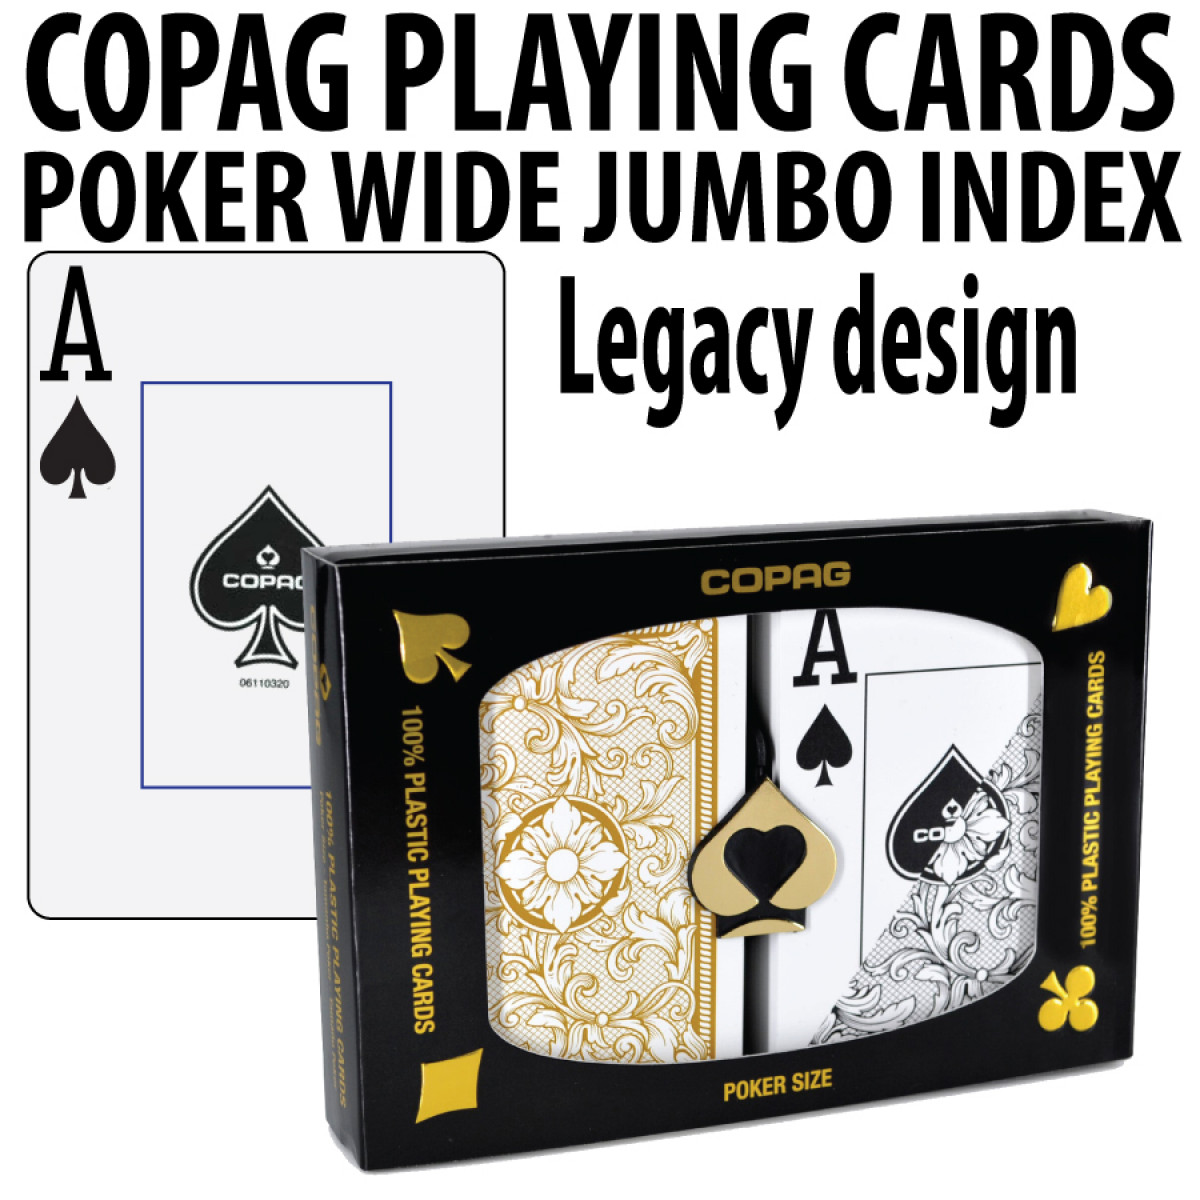 Copag “Unique” Plastic Playing Cards Poker Size Jumbo Index Gold/Grey Double-Dec 